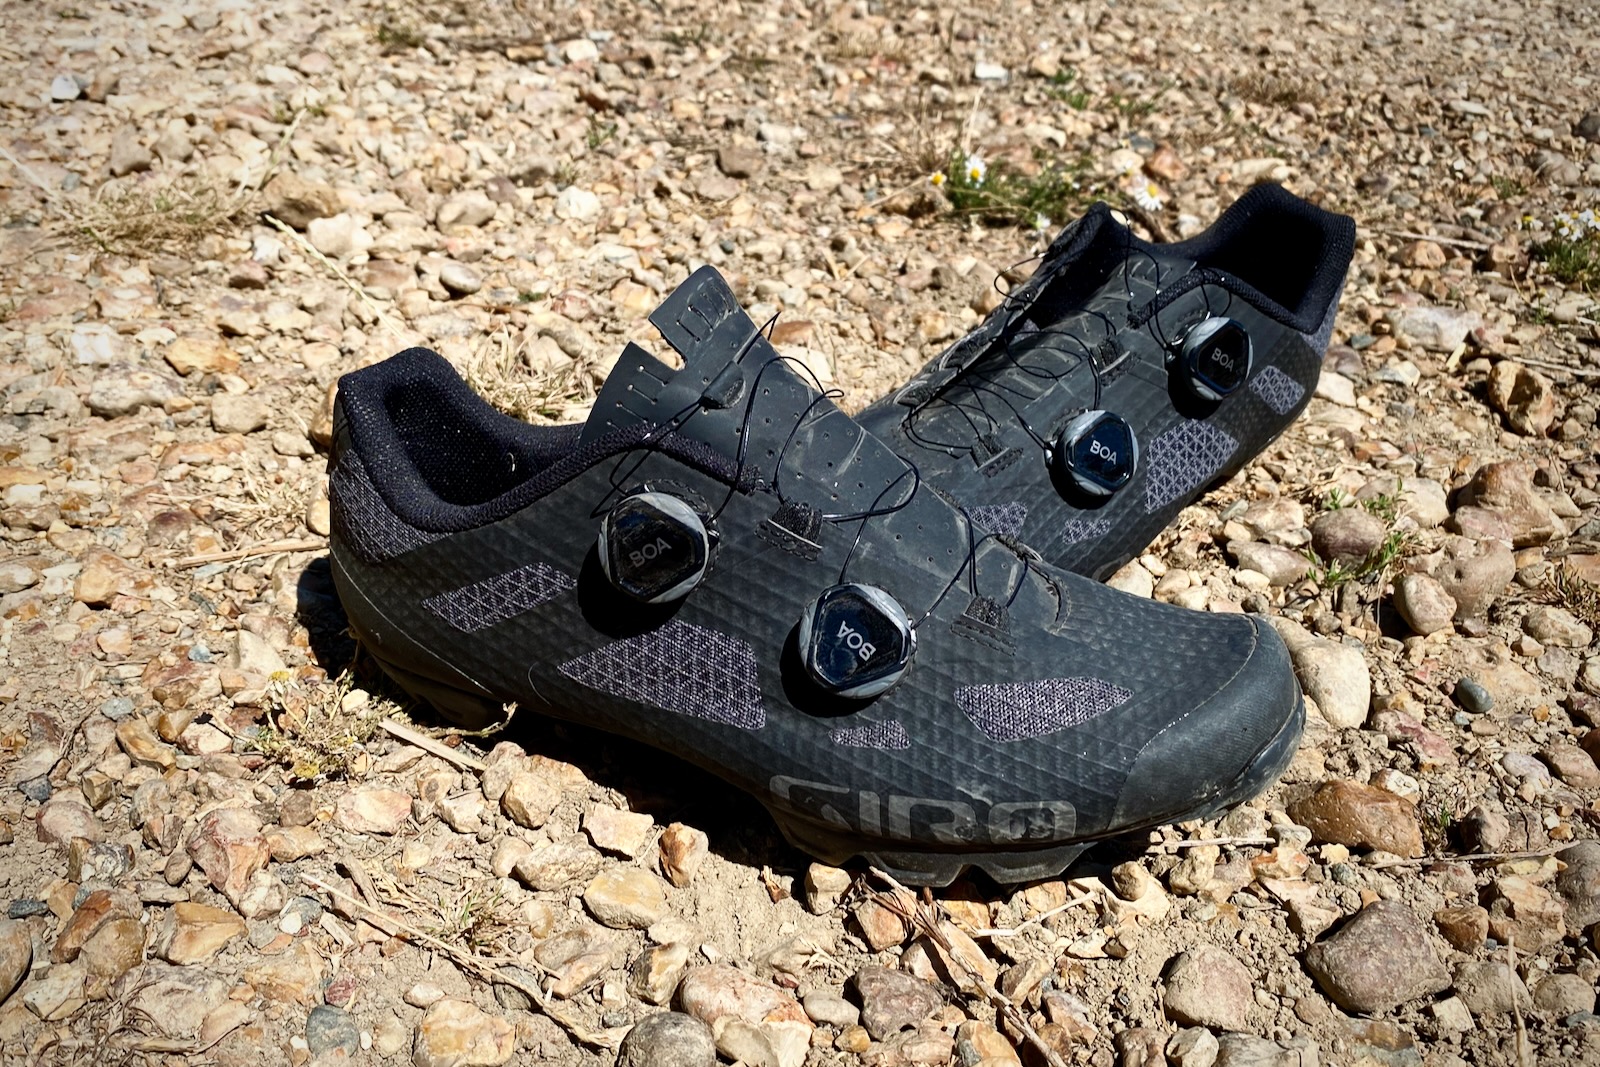 Review Giro Sector MTB Gravel Cycling Shoes